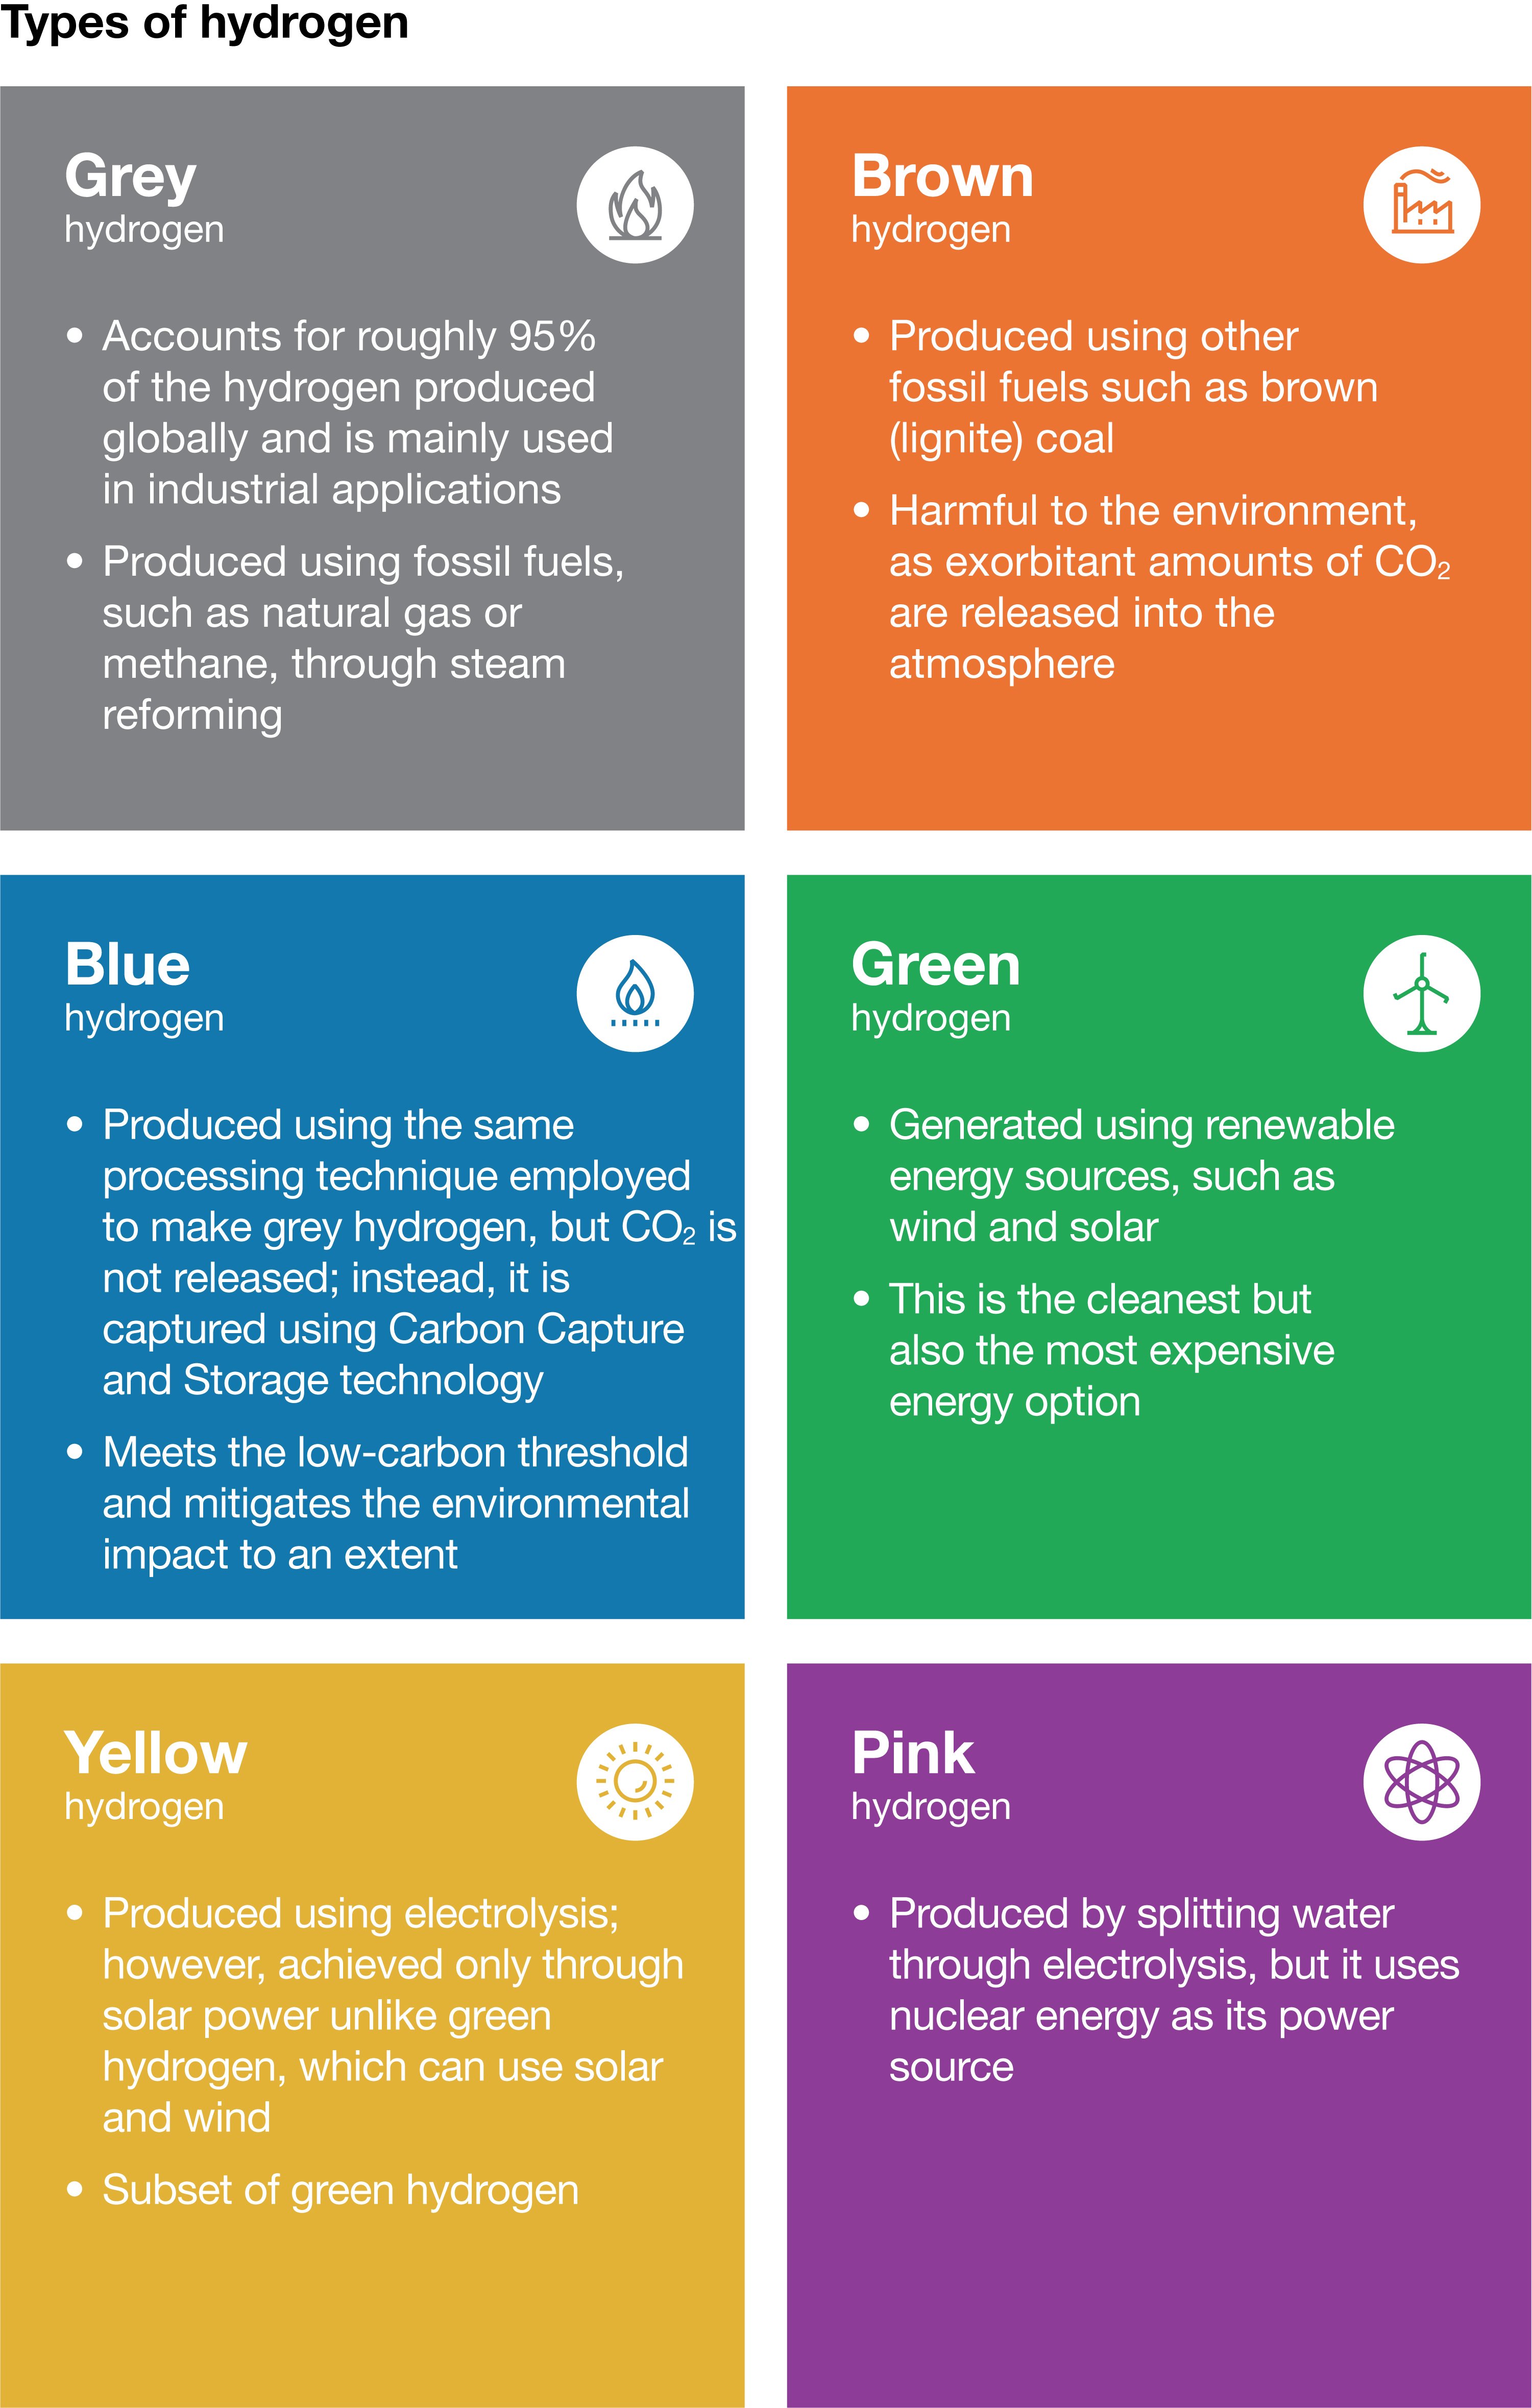 6 different types of hydrogen